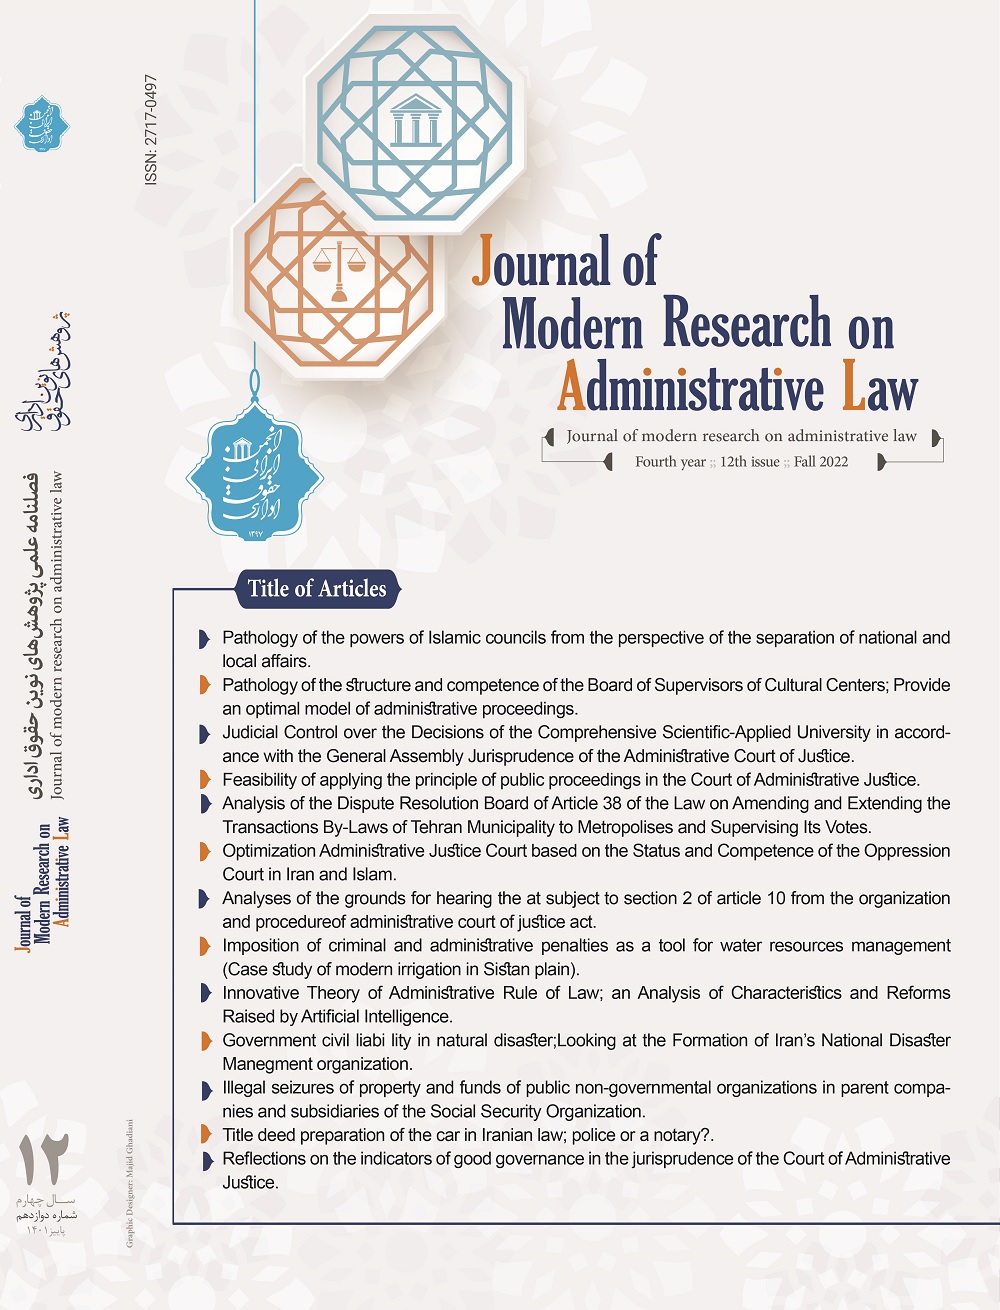 The Journal of Modern Research on Administrative Law